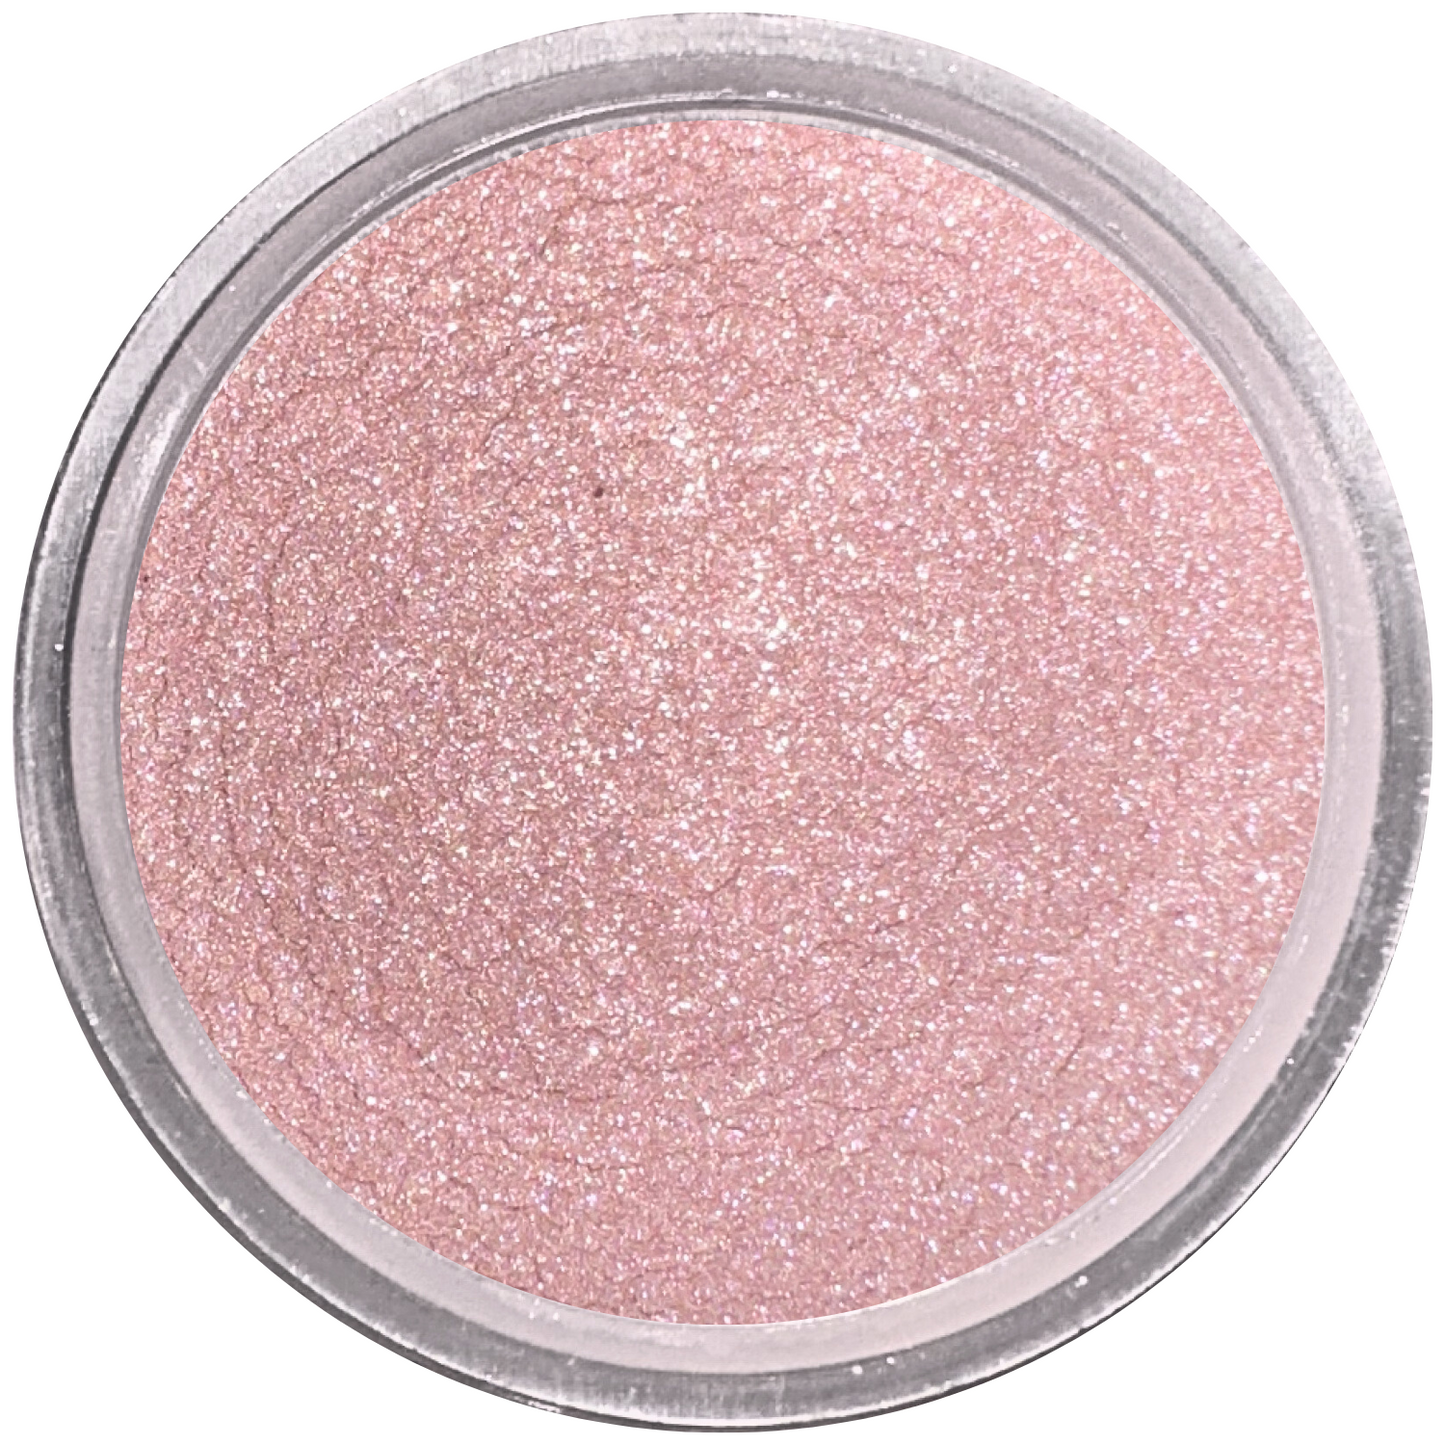 Brushed Light Copper Loose Powder Mineral Eyeshadow Single 3g